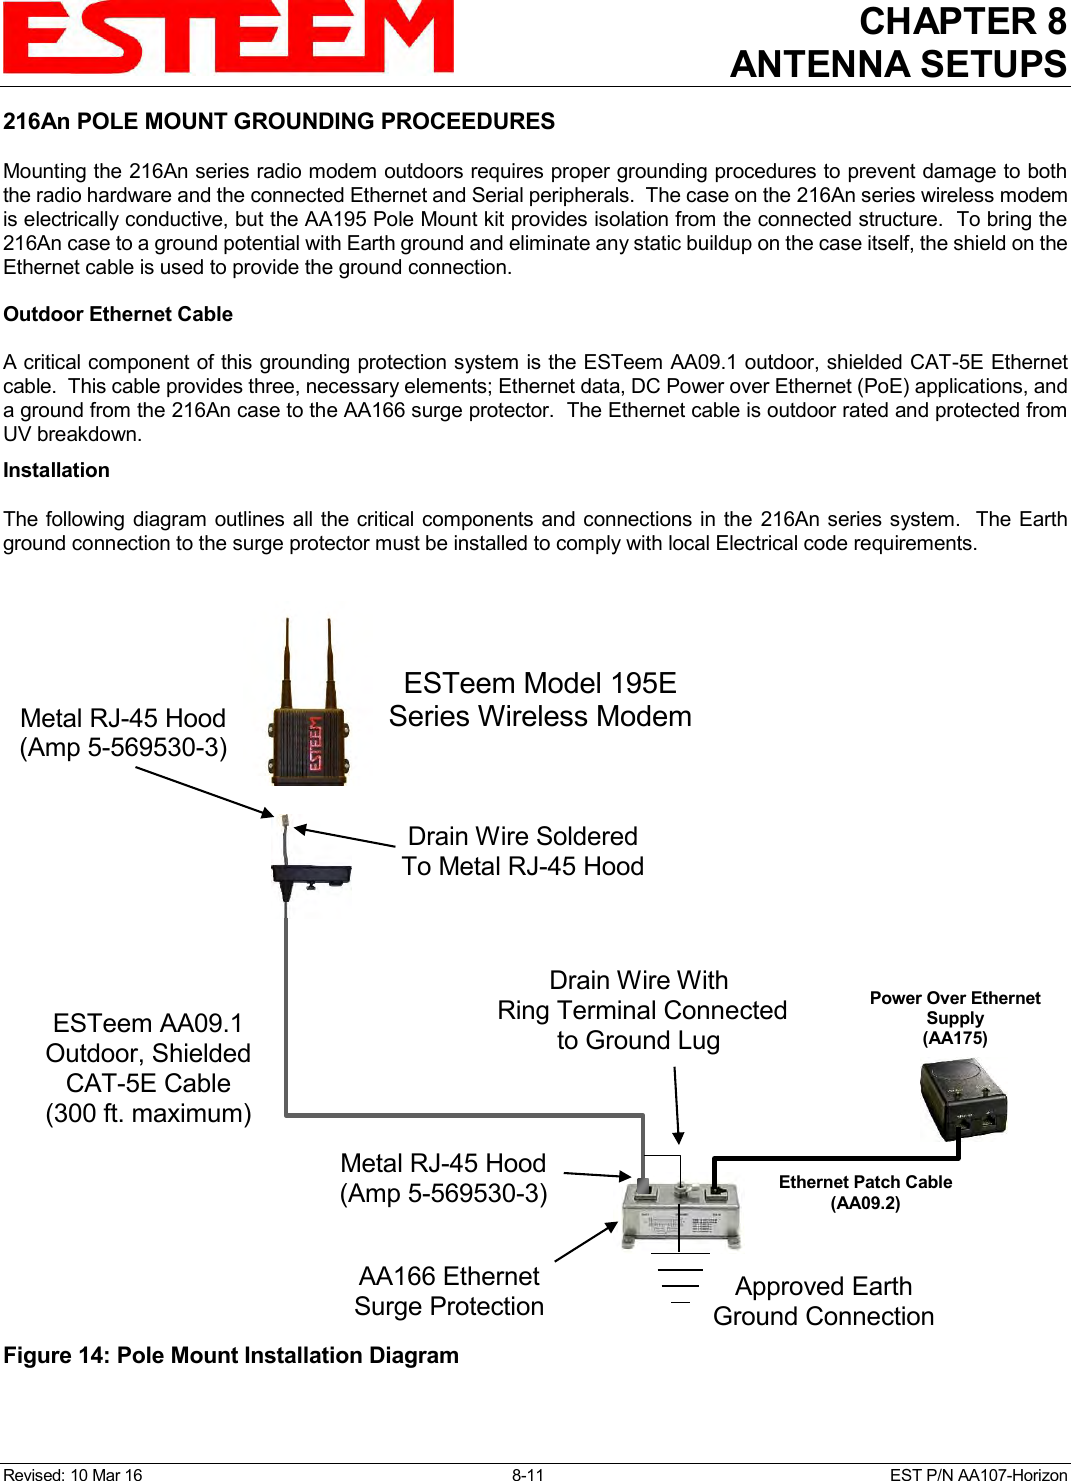 CHAPTER 8 ANTENNA SETUPS   Revised: 10 Mar 16  8-11   EST P/N AA107-Horizon 216An POLE MOUNT GROUNDING PROCEEDURES  Mounting the 216An series radio modem outdoors requires proper grounding procedures to prevent damage to both the radio hardware and the connected Ethernet and Serial peripherals.  The case on the 216An series wireless modem is electrically conductive, but the AA195 Pole Mount kit provides isolation from the connected structure.  To bring the 216An case to a ground potential with Earth ground and eliminate any static buildup on the case itself, the shield on the Ethernet cable is used to provide the ground connection.  Outdoor Ethernet Cable  A critical component of this grounding protection system is the ESTeem AA09.1 outdoor, shielded CAT-5E Ethernet cable.  This cable provides three, necessary elements; Ethernet data, DC Power over Ethernet (PoE) applications, and a ground from the 216An case to the AA166 surge protector.  The Ethernet cable is outdoor rated and protected from UV breakdown. Installation  The following diagram outlines all the critical components and connections  in the  216An series system.  The Earth ground connection to the surge protector must be installed to comply with local Electrical code requirements.  Figure 14: Pole Mount Installation Diagram  ESTeem Model 195E Series Wireless Modem ESTeem AA09.1 Outdoor, Shielded CAT-5E Cable (300 ft. maximum) Metal RJ-45 Hood (Amp 5-569530-3) Drain Wire Soldered To Metal RJ-45 Hood Drain Wire With  Ring Terminal Connected to Ground Lug Approved Earth Ground Connection AA166 Ethernet Surge Protection Ethernet Patch Cable (AA09.2) Power Over Ethernet Supply (AA175) Metal RJ-45 Hood (Amp 5-569530-3) 